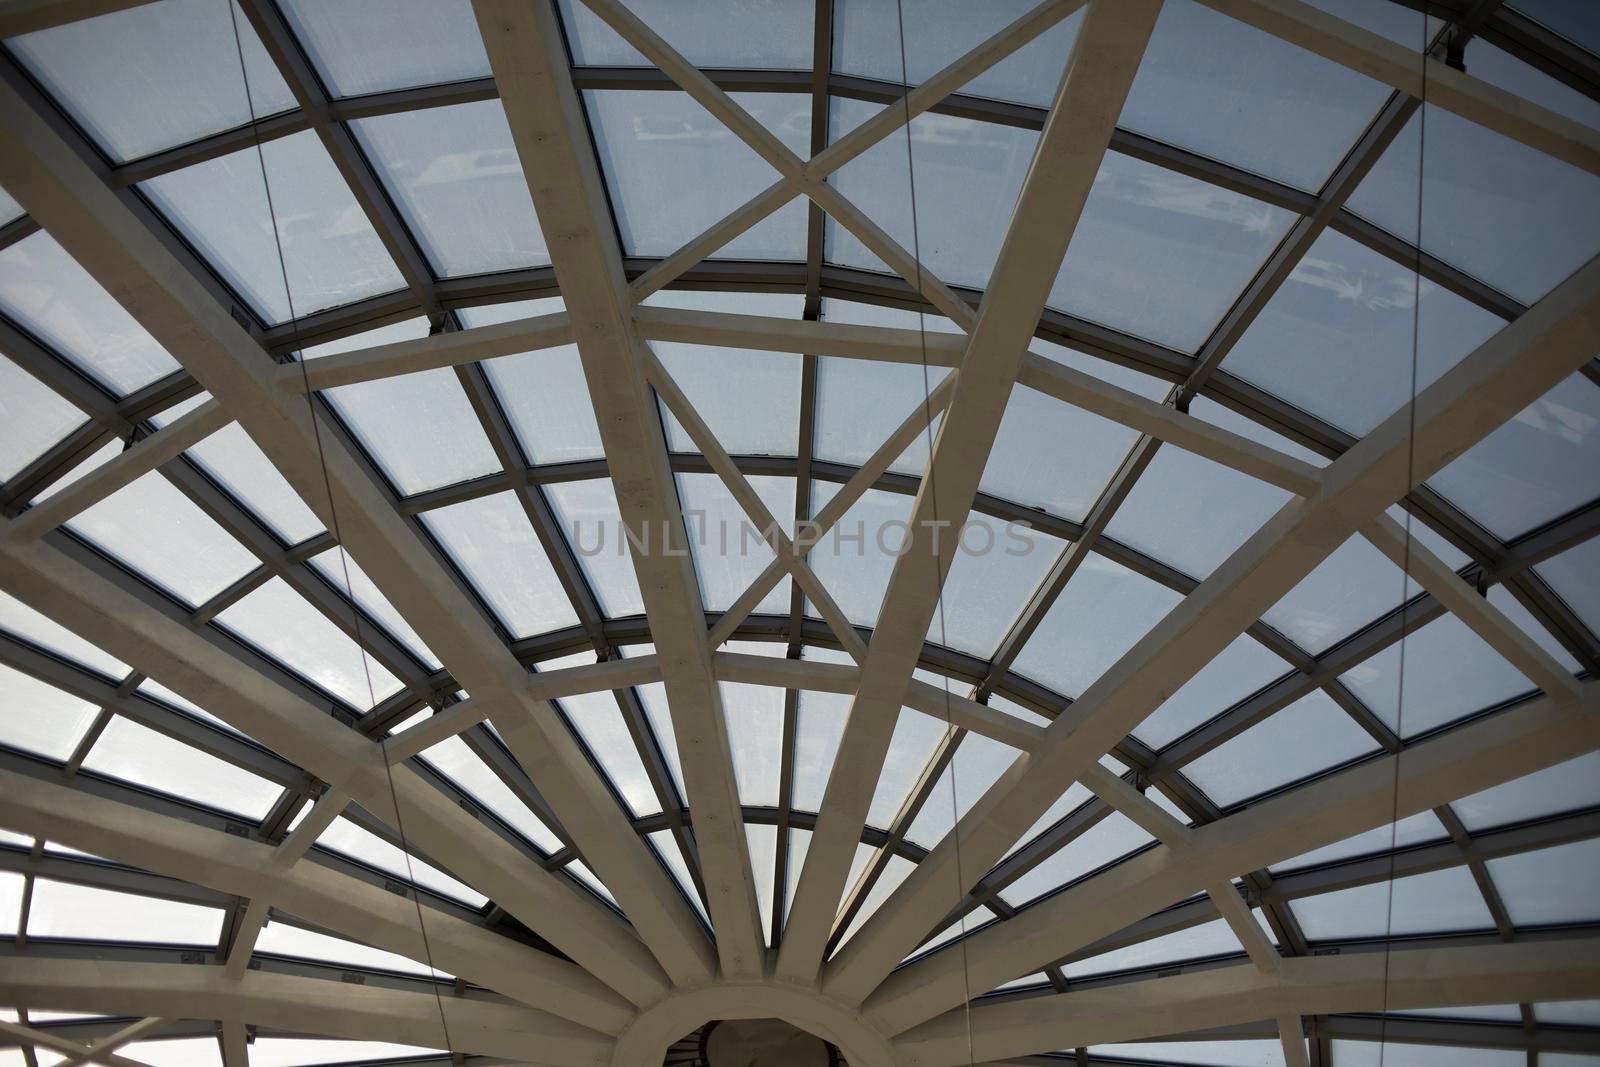 Dome roof made of glass and fittings. Steel beams form circle. Glazed roof of shopping center.